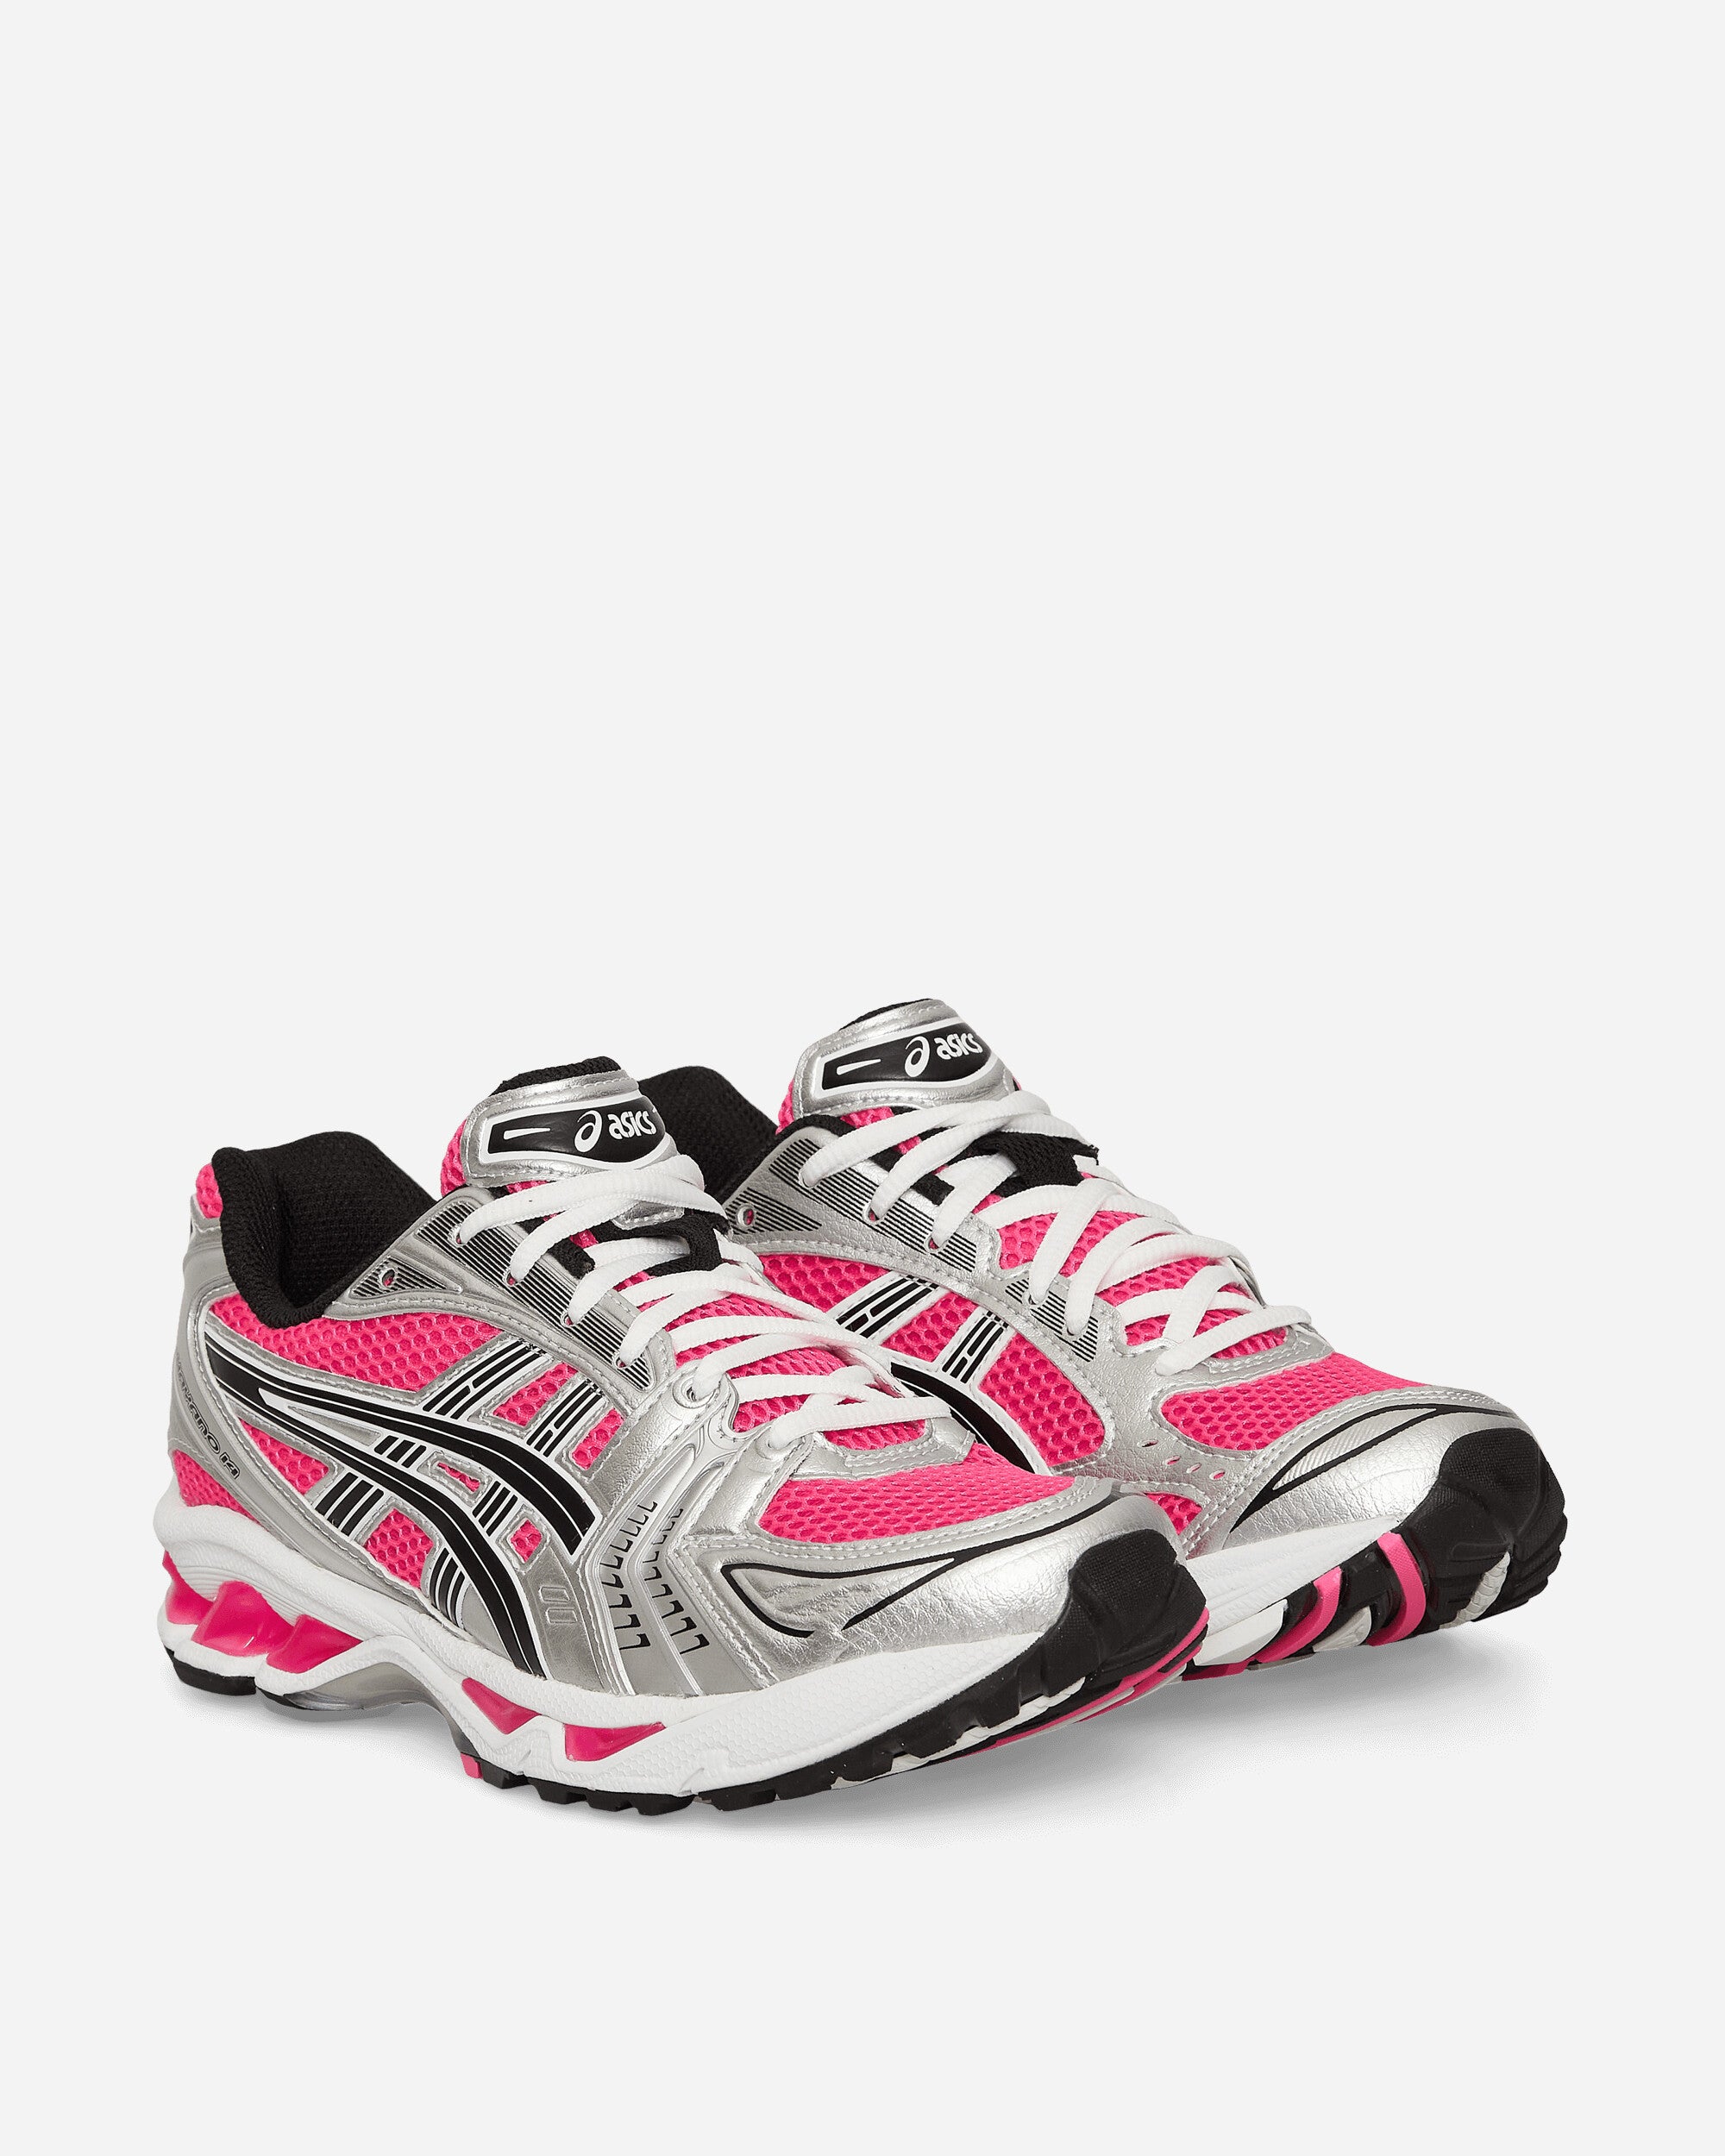 Asics 14 Sneakers Pink Glo / Black - Slam Official